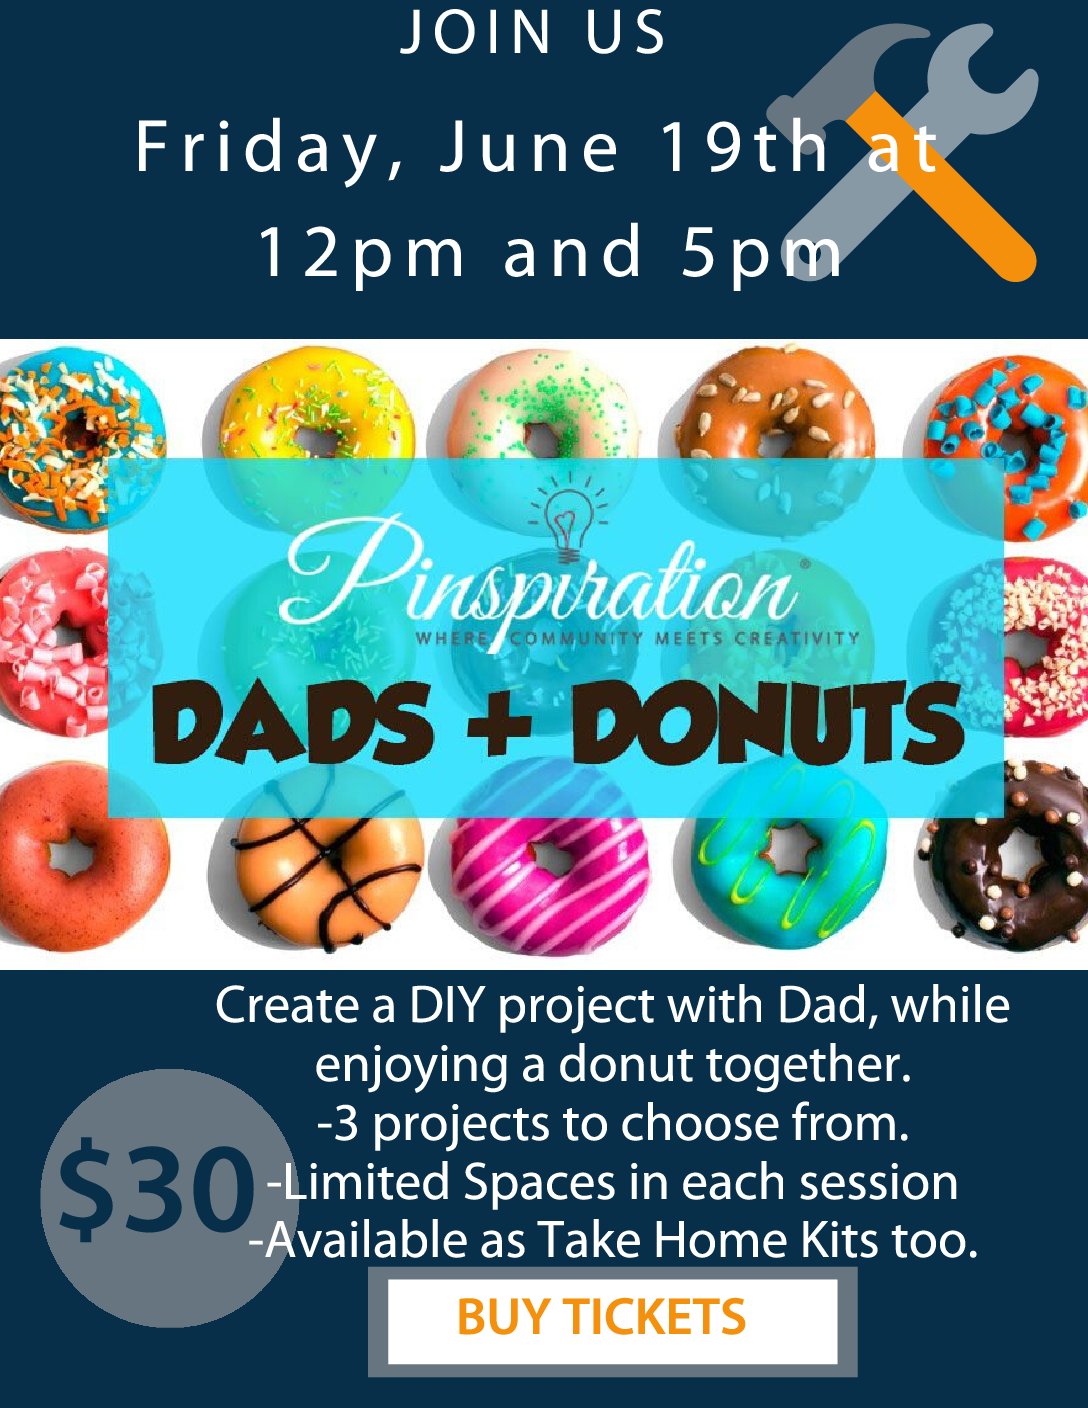 DADS + DONUTS